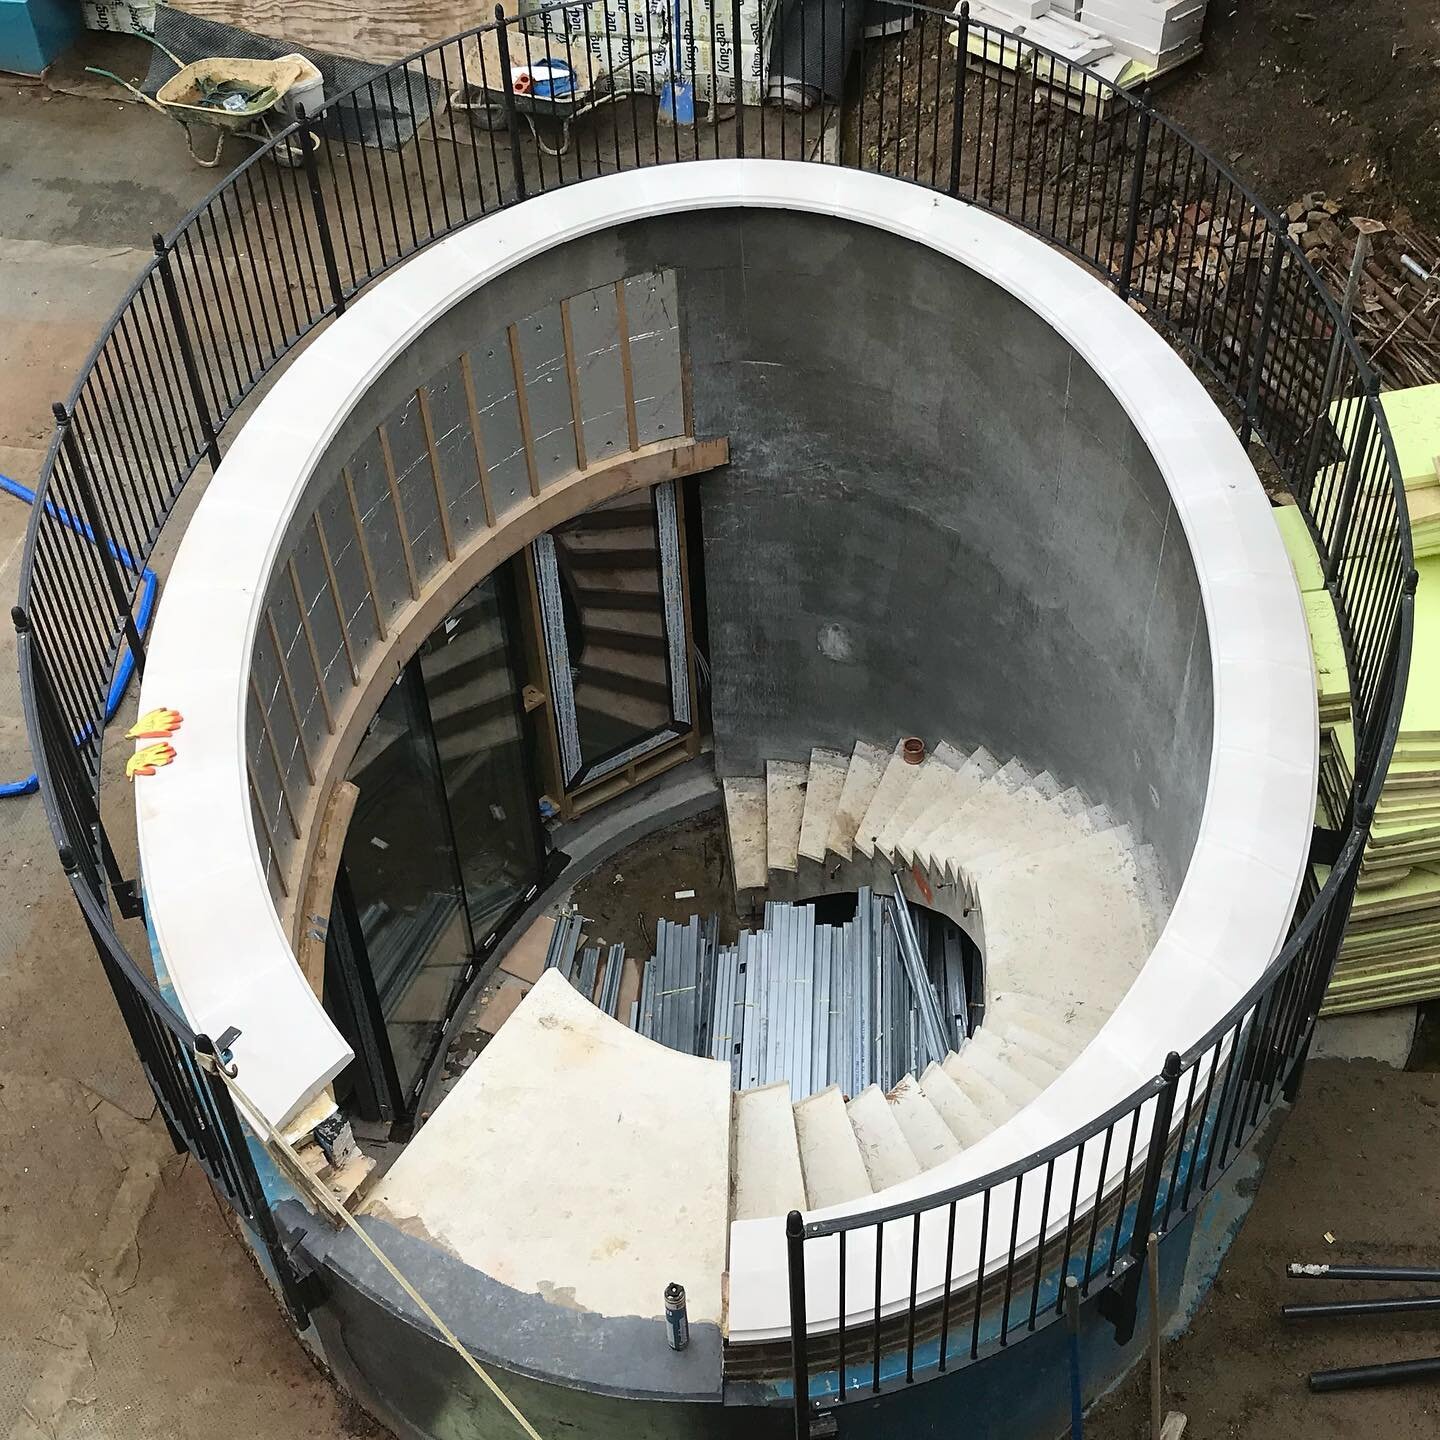 Bespoke Portland cast stone Copings supplied to clients specification to cap off this unusual Elipsis stairwell. The next stage is to supply Limestone Treads to overclad the concrete steps. Looking forward to seeing the completed project.
 #limestone